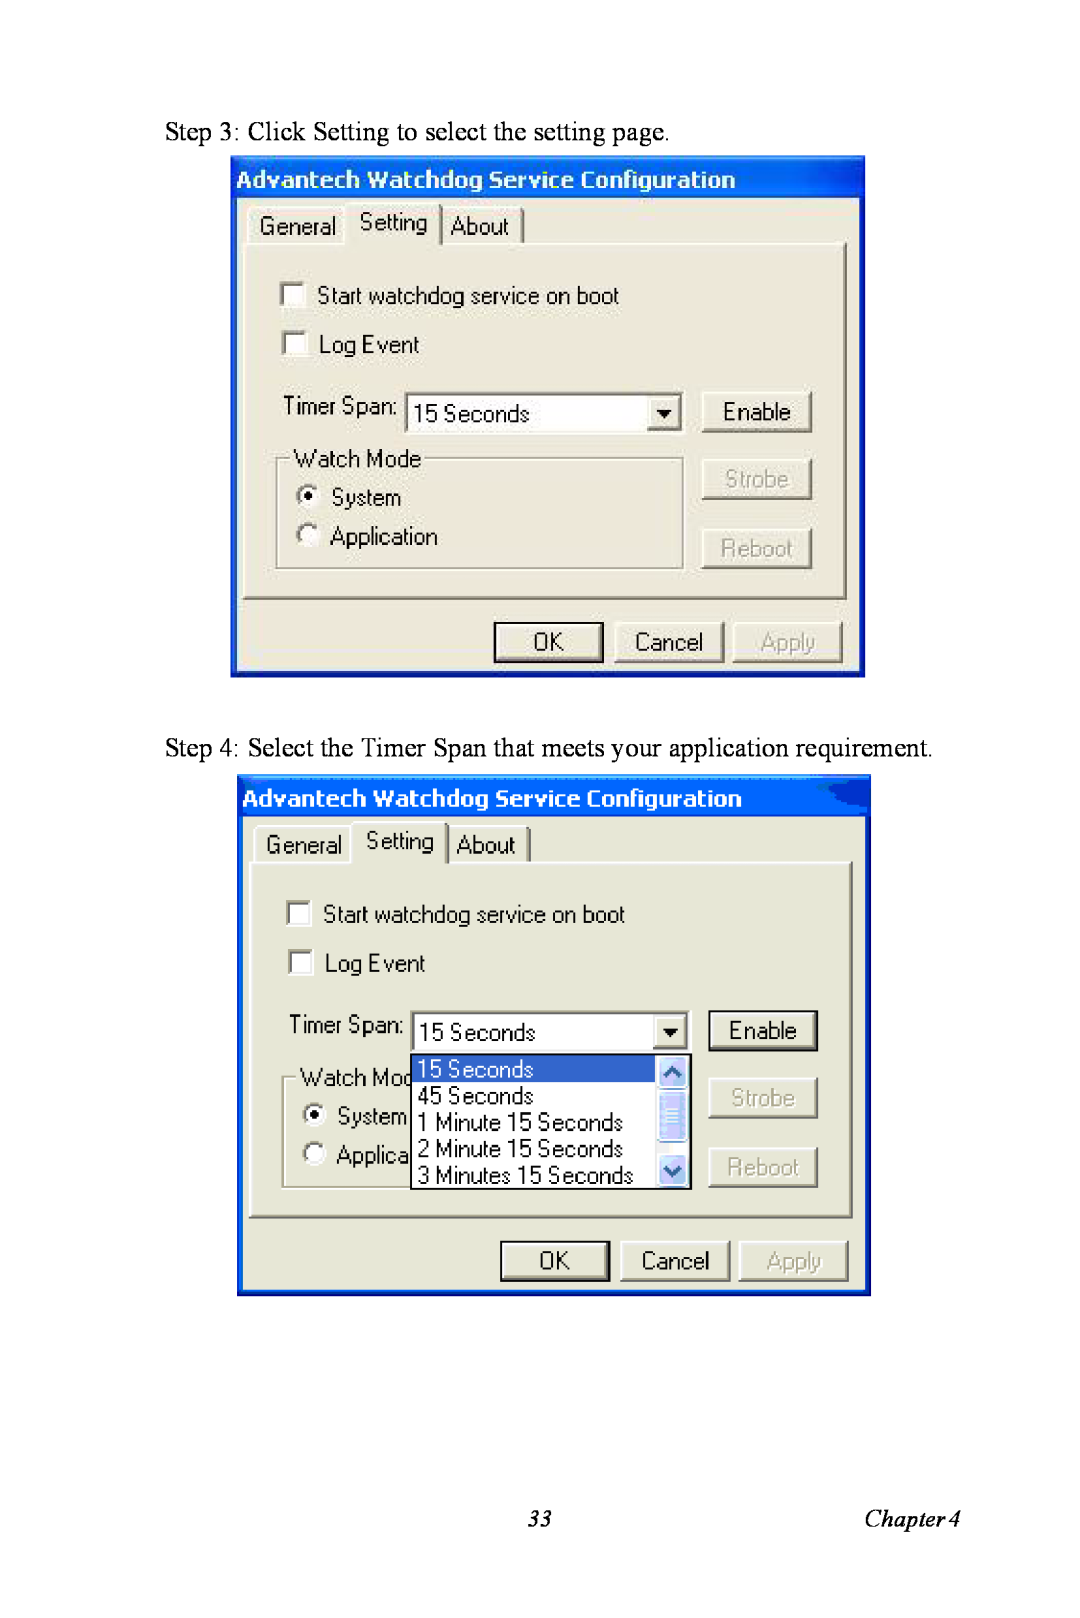 Intel TPC-1070 Click Setting to select the setting page, Select the Timer Span that meets your application requirement 